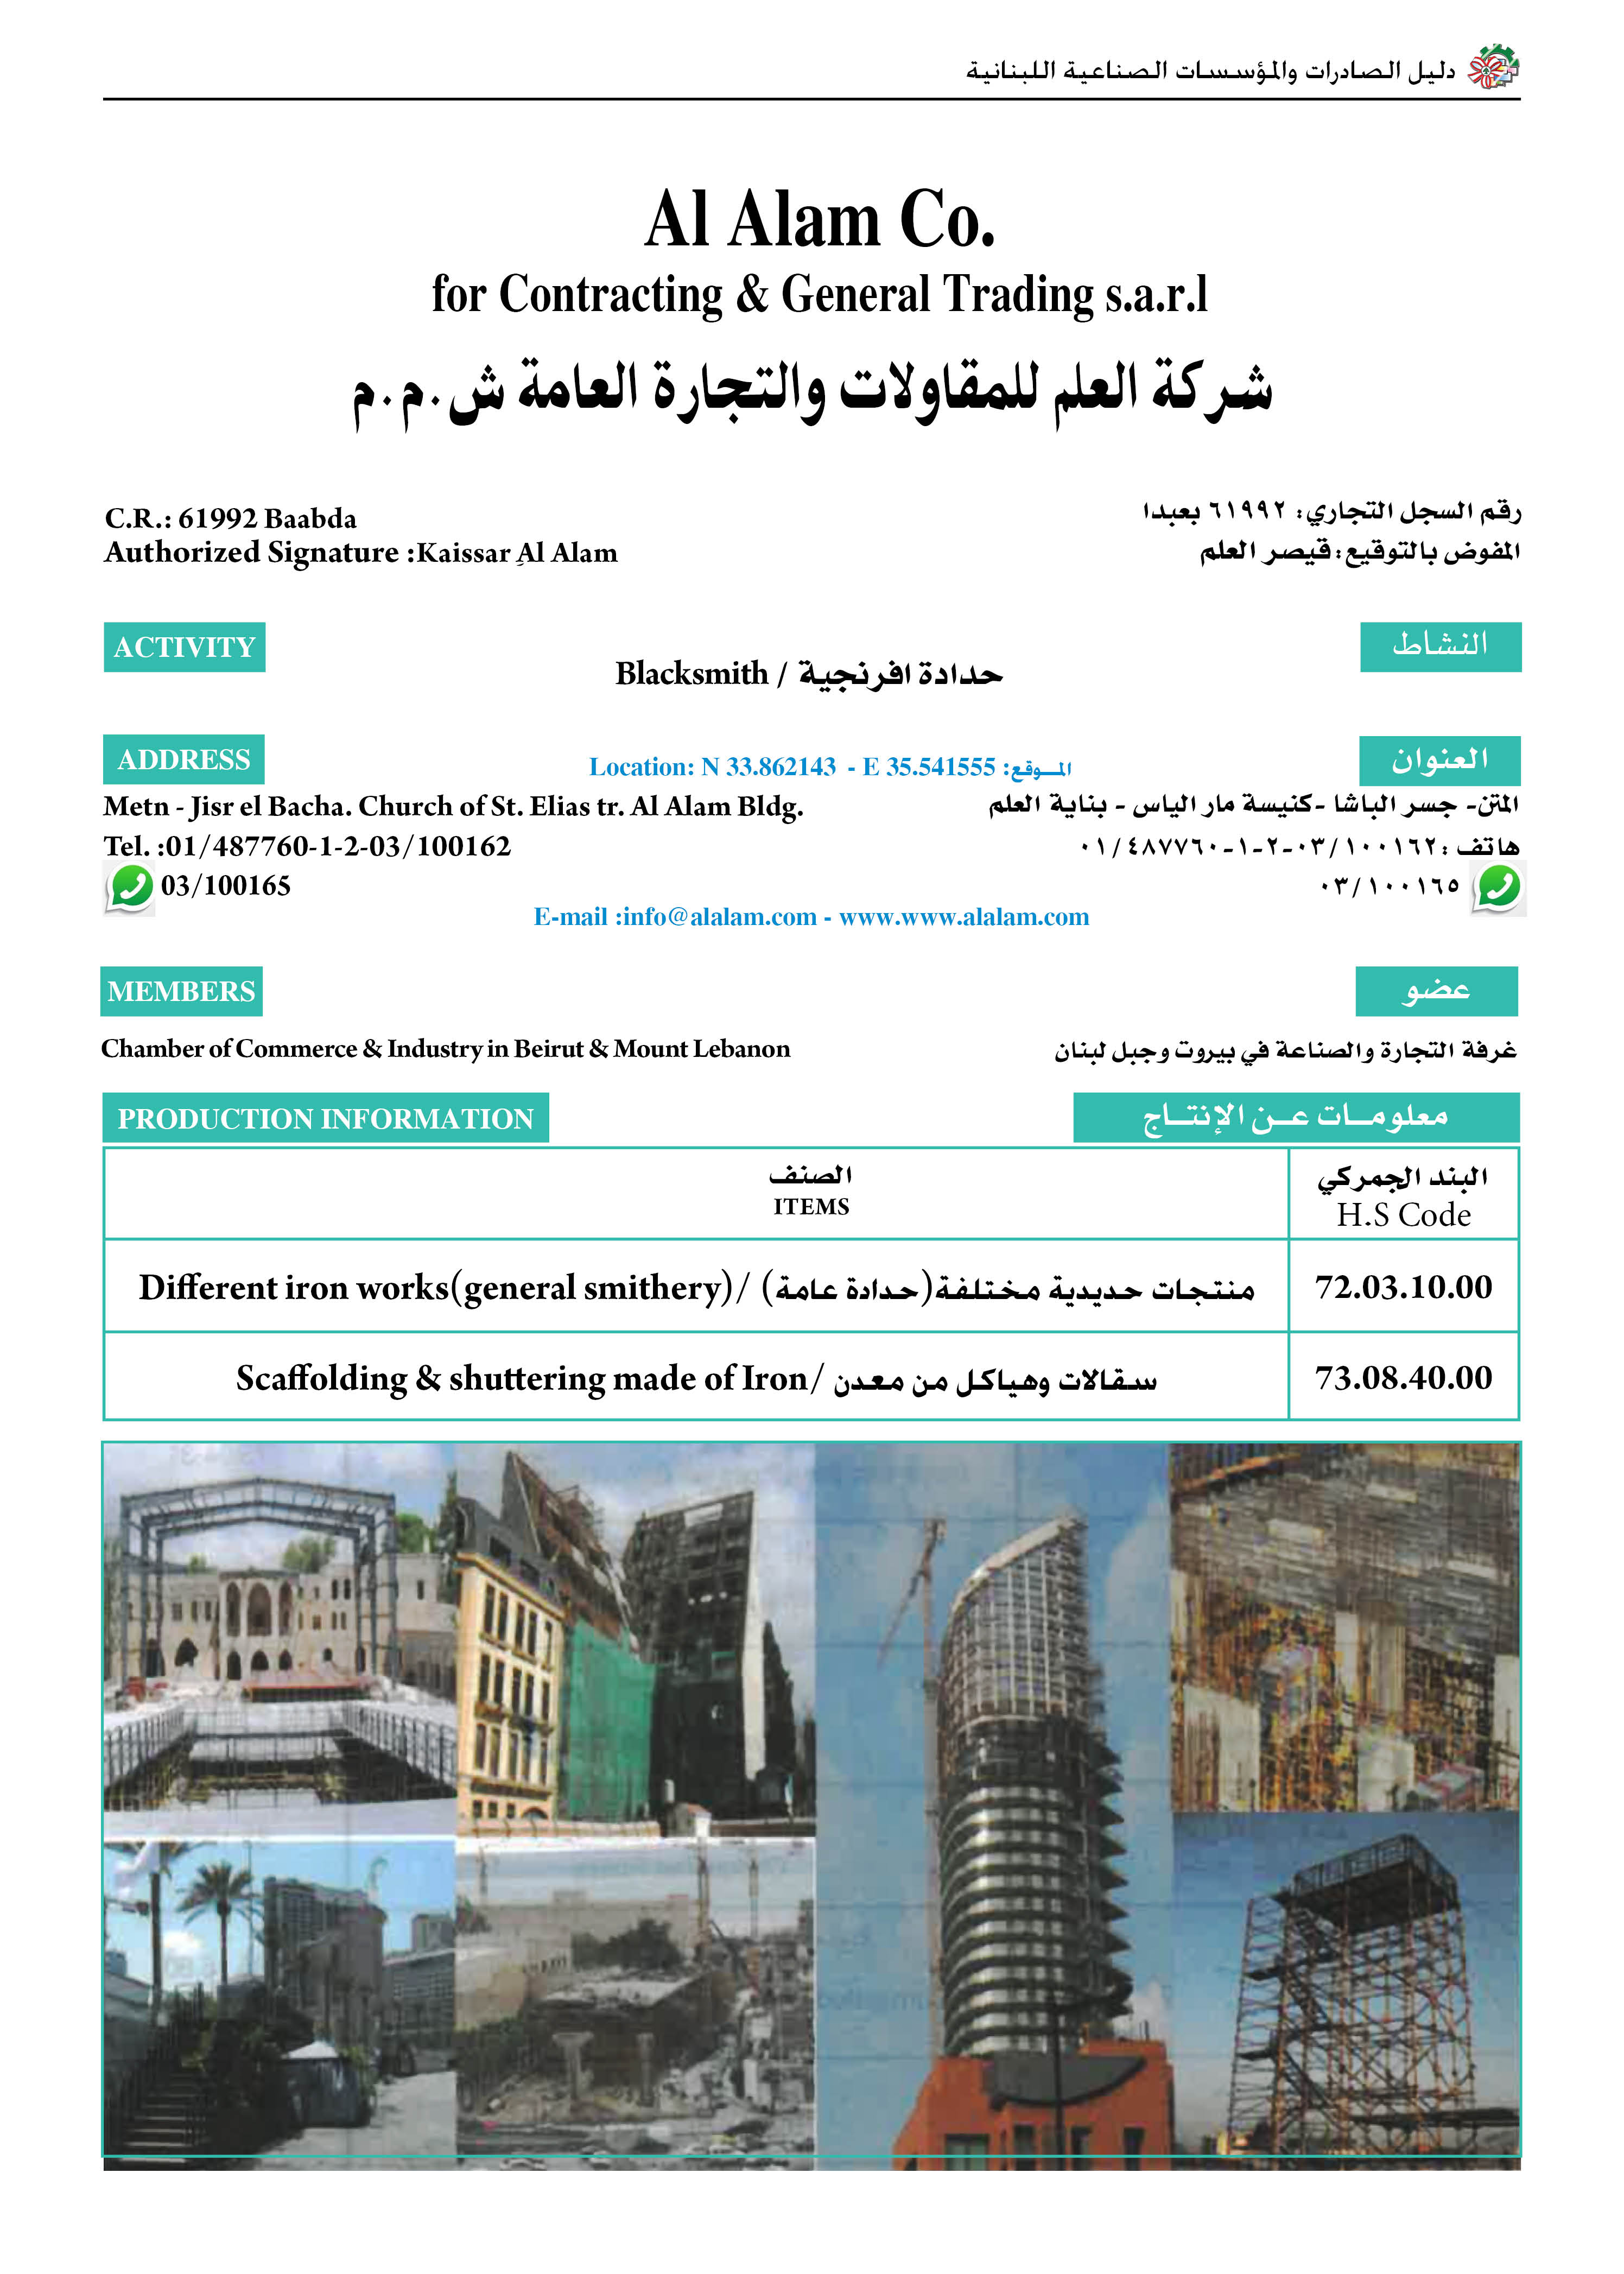 Al Alam Co. for Contracting & General Trading sarl